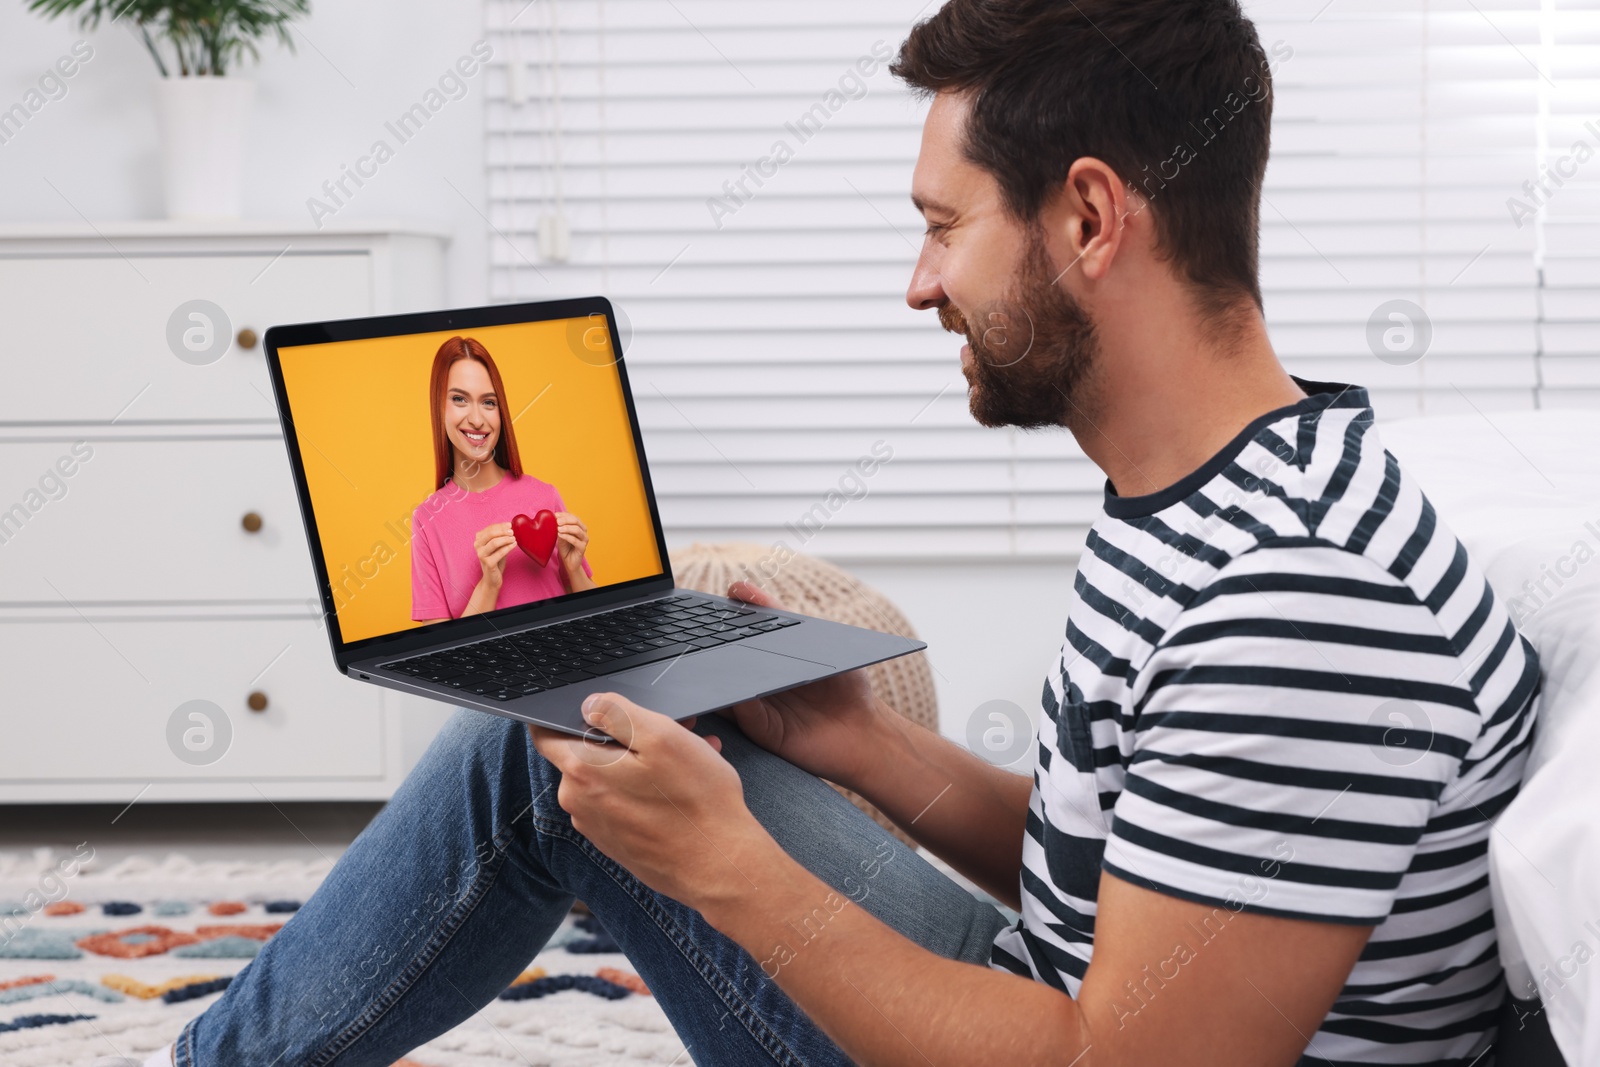 Image of Long distance love. Man having video chat with his girlfriend via laptop at home